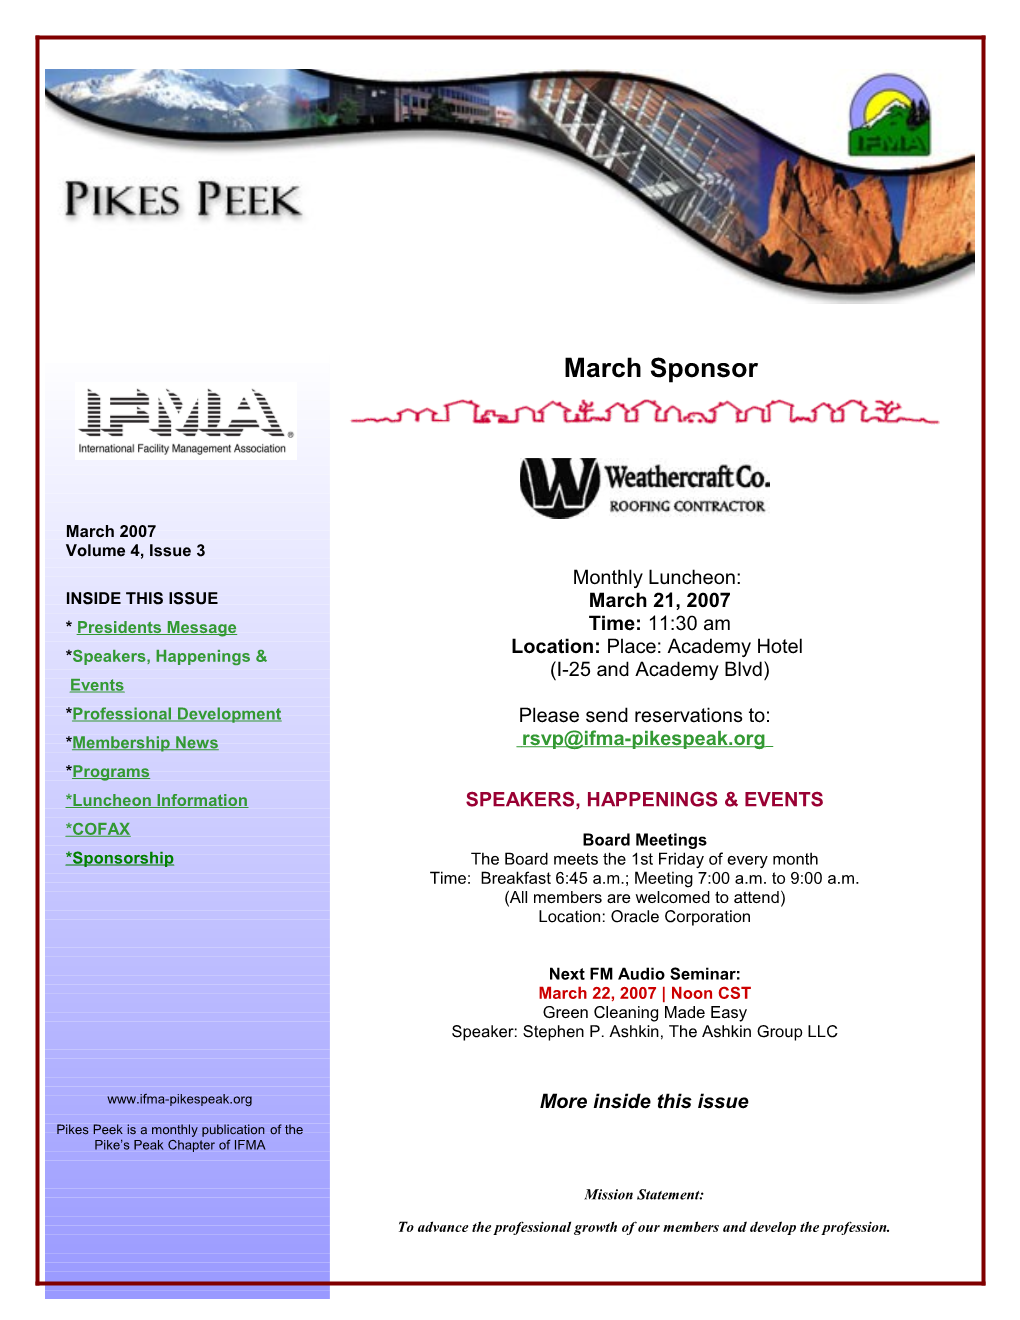 The Pikes Peak Chapter of IFMA s3